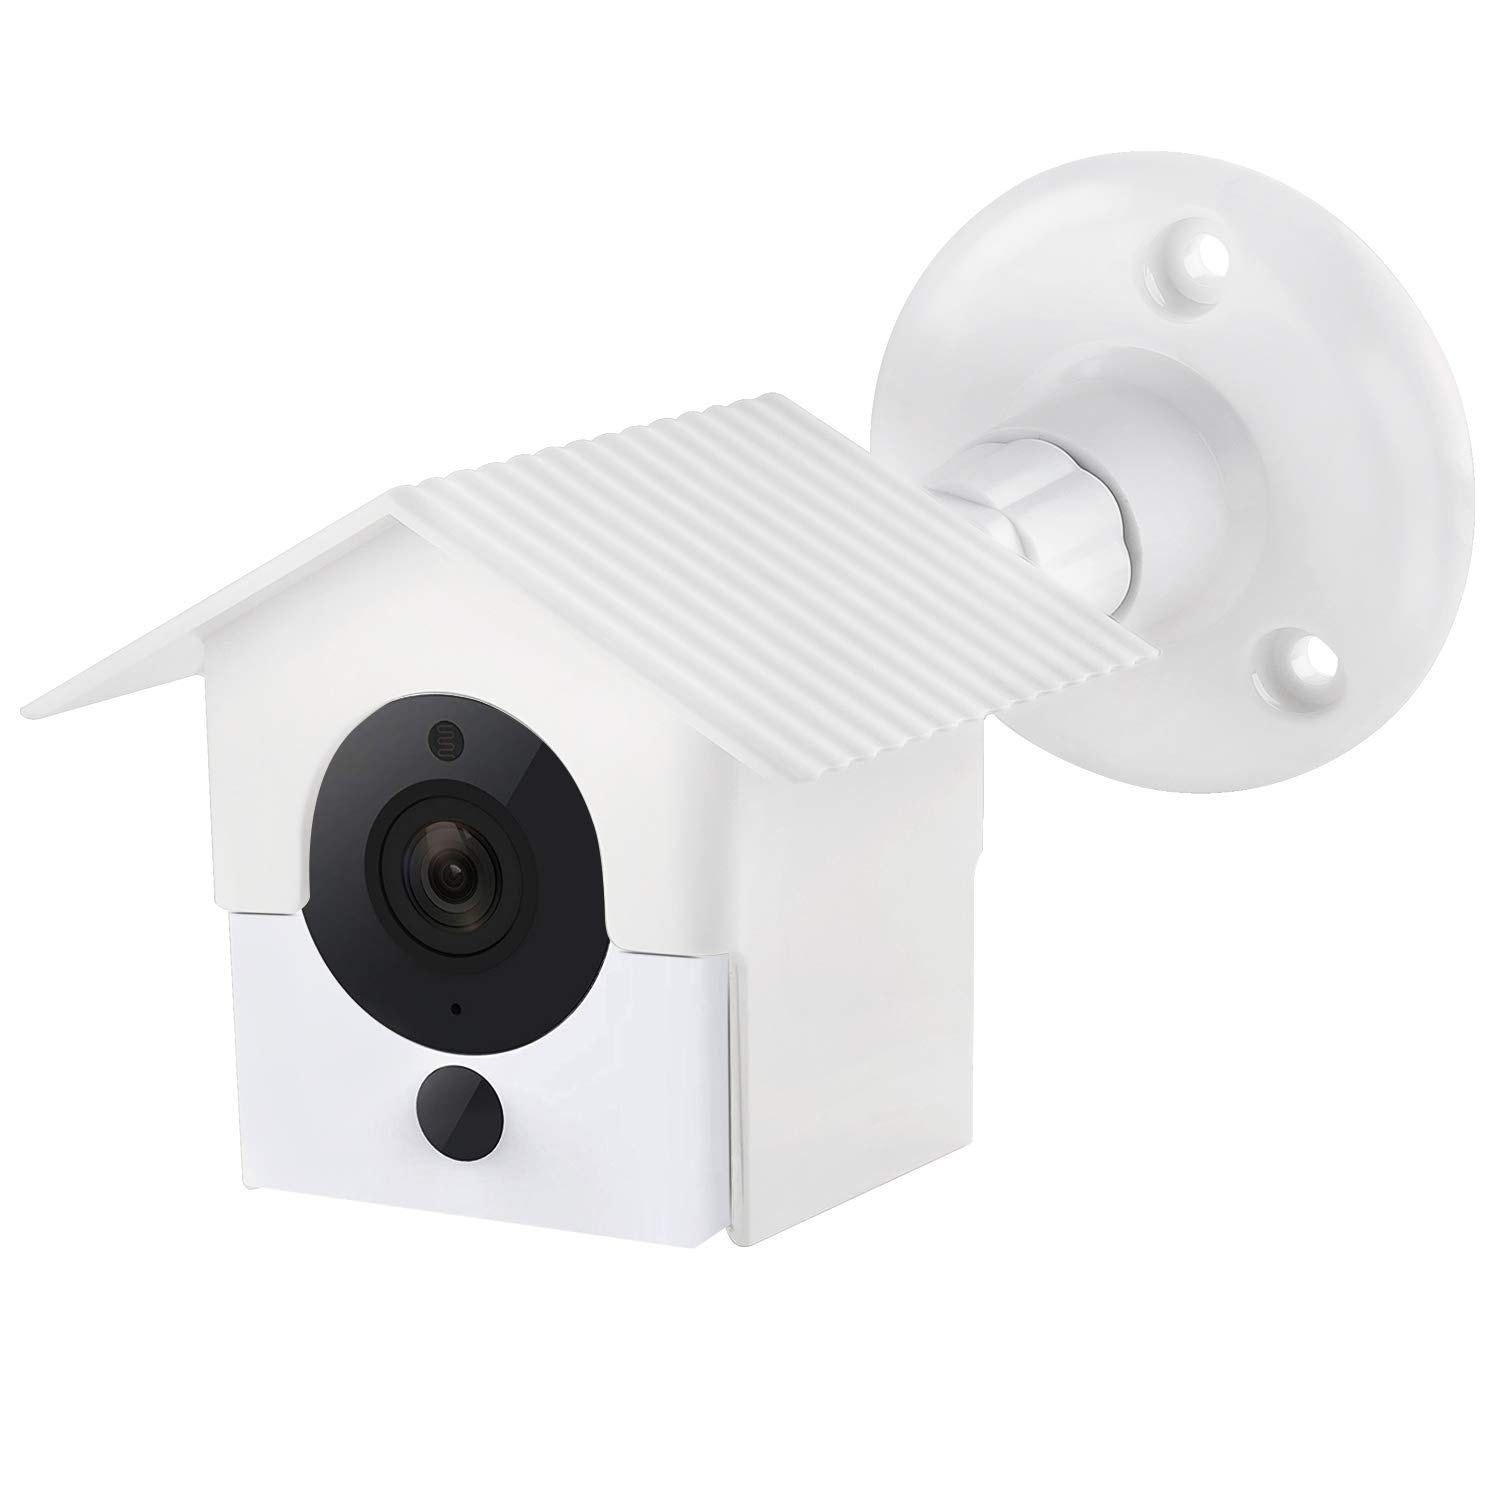 Book Cover Wyze Cam V2 Wall Mount,Protective Weather Proof Pan Housing Security Mount,for Wyze Cam 1082p HD Indoor Outdoor Cam and IsmartAlarm Spot Cam White